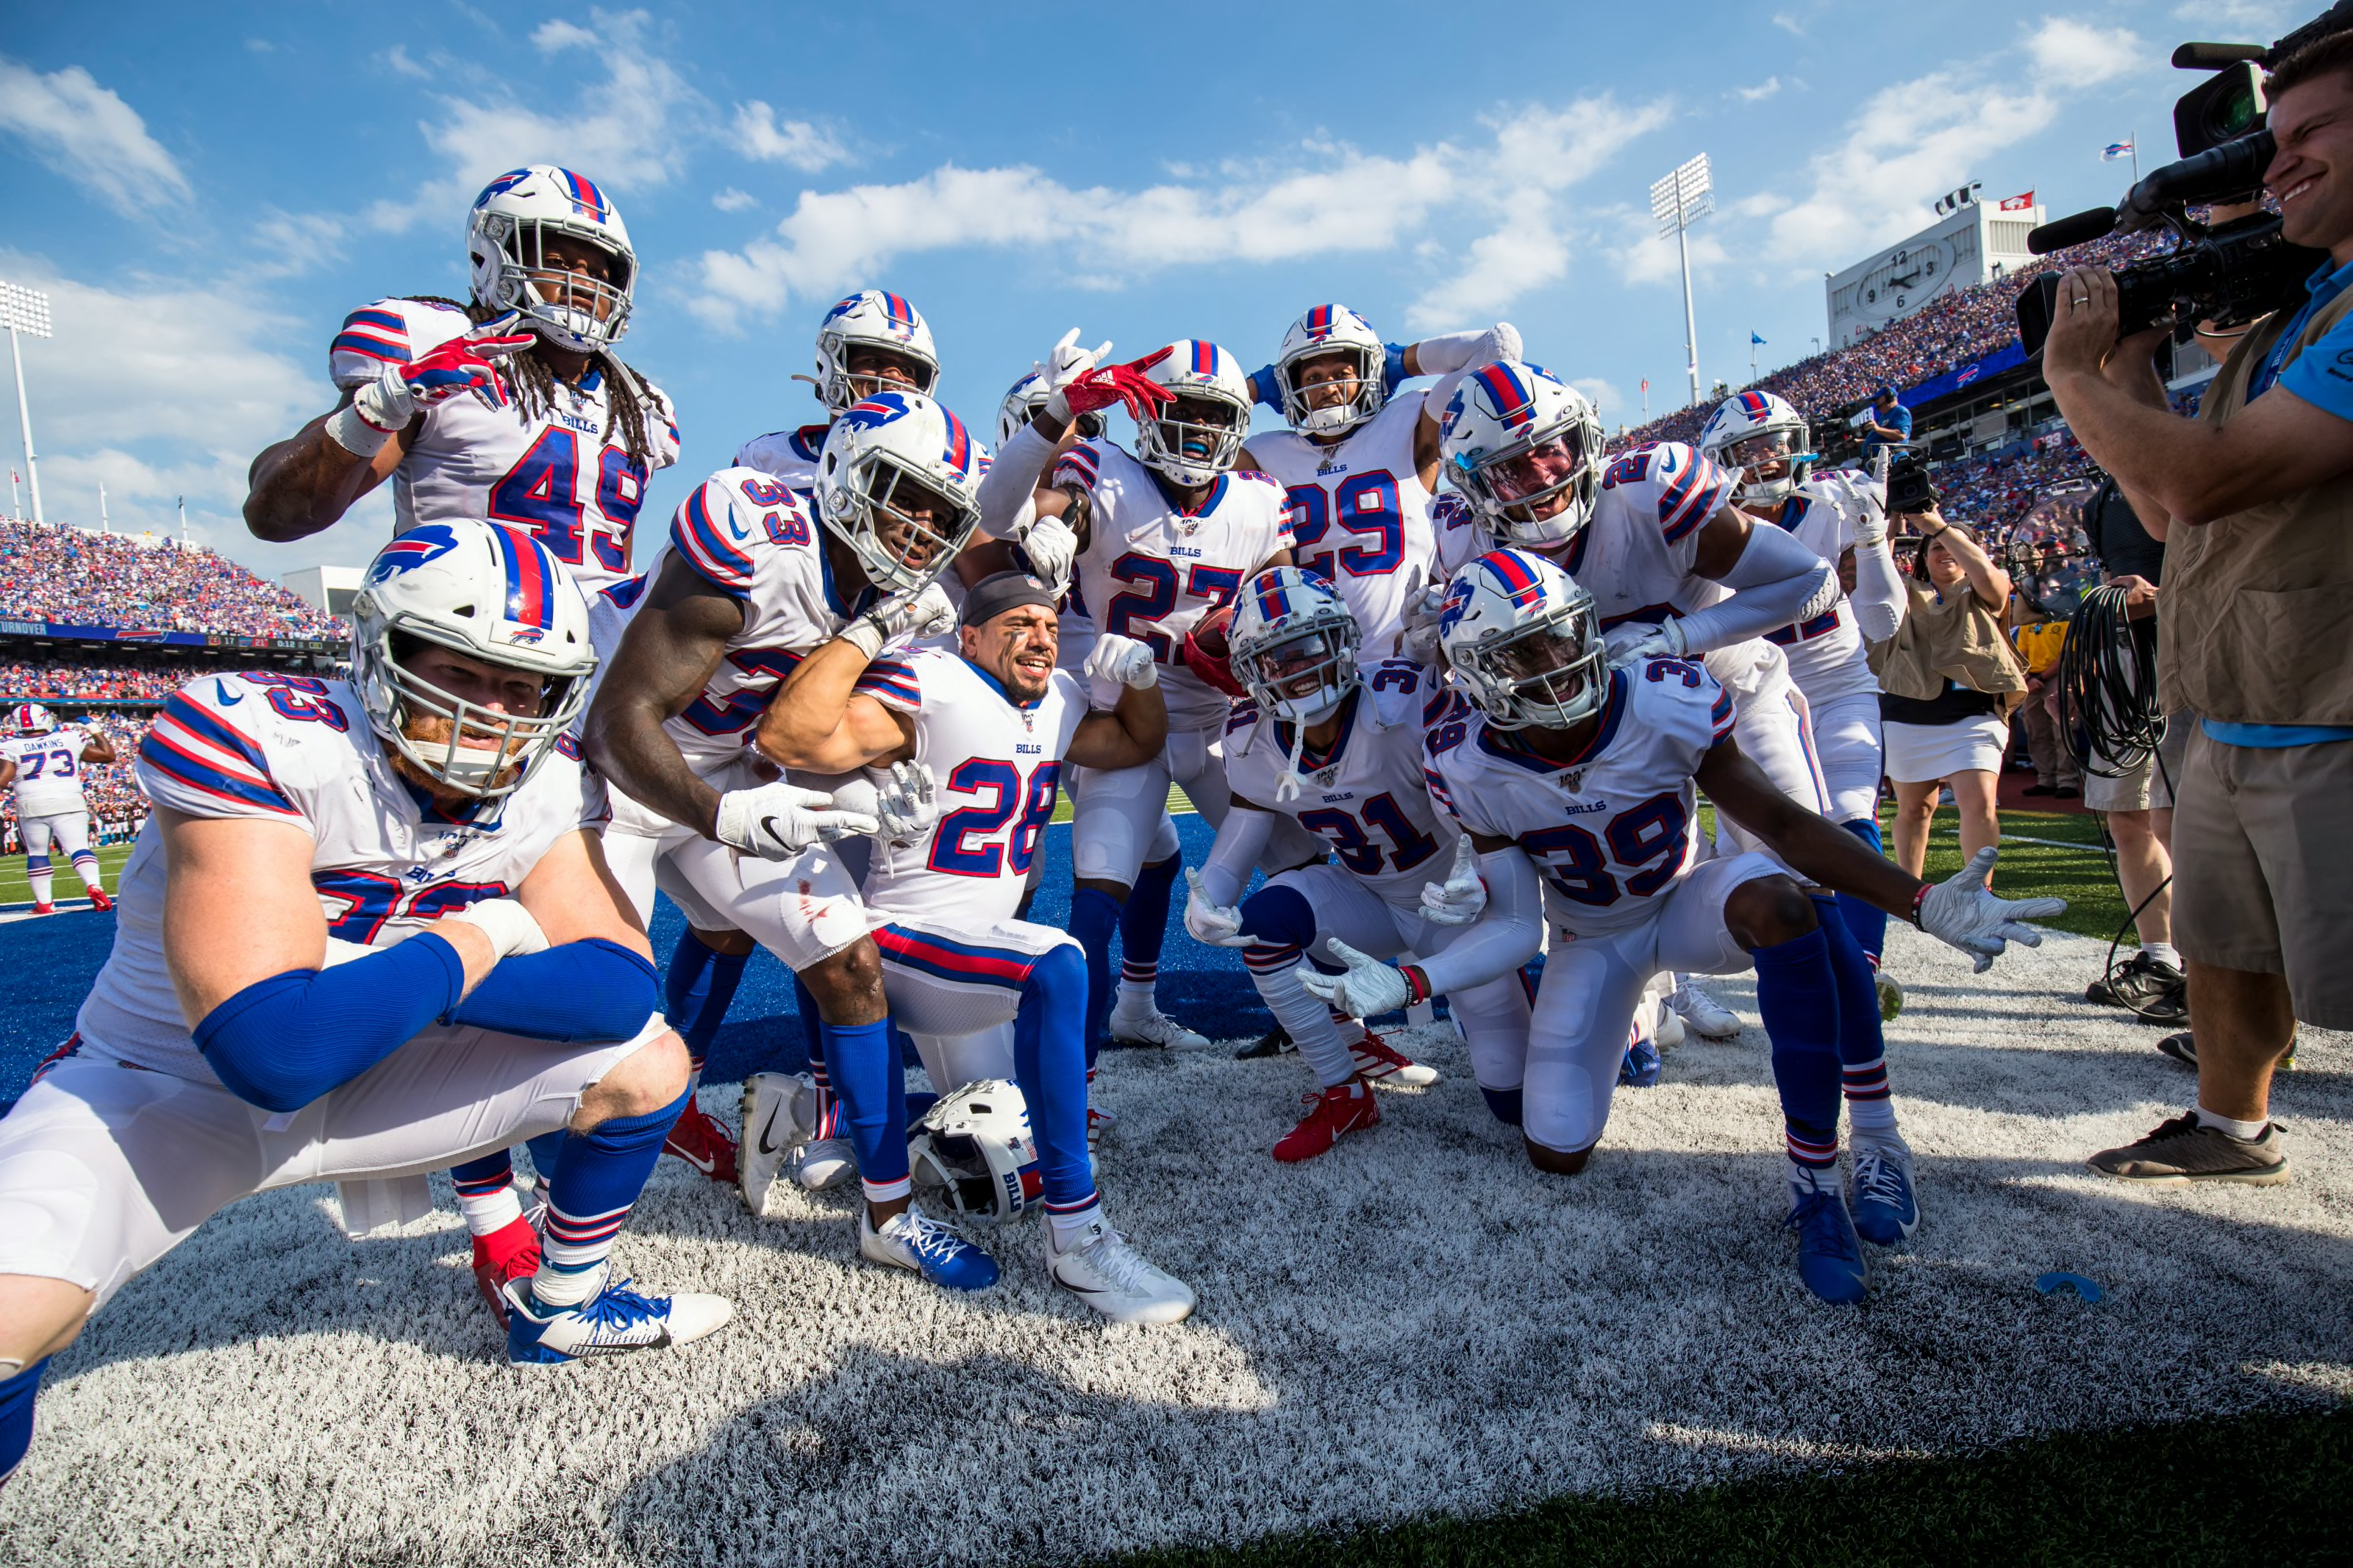 Ranking the Bills among the teams in the NFL